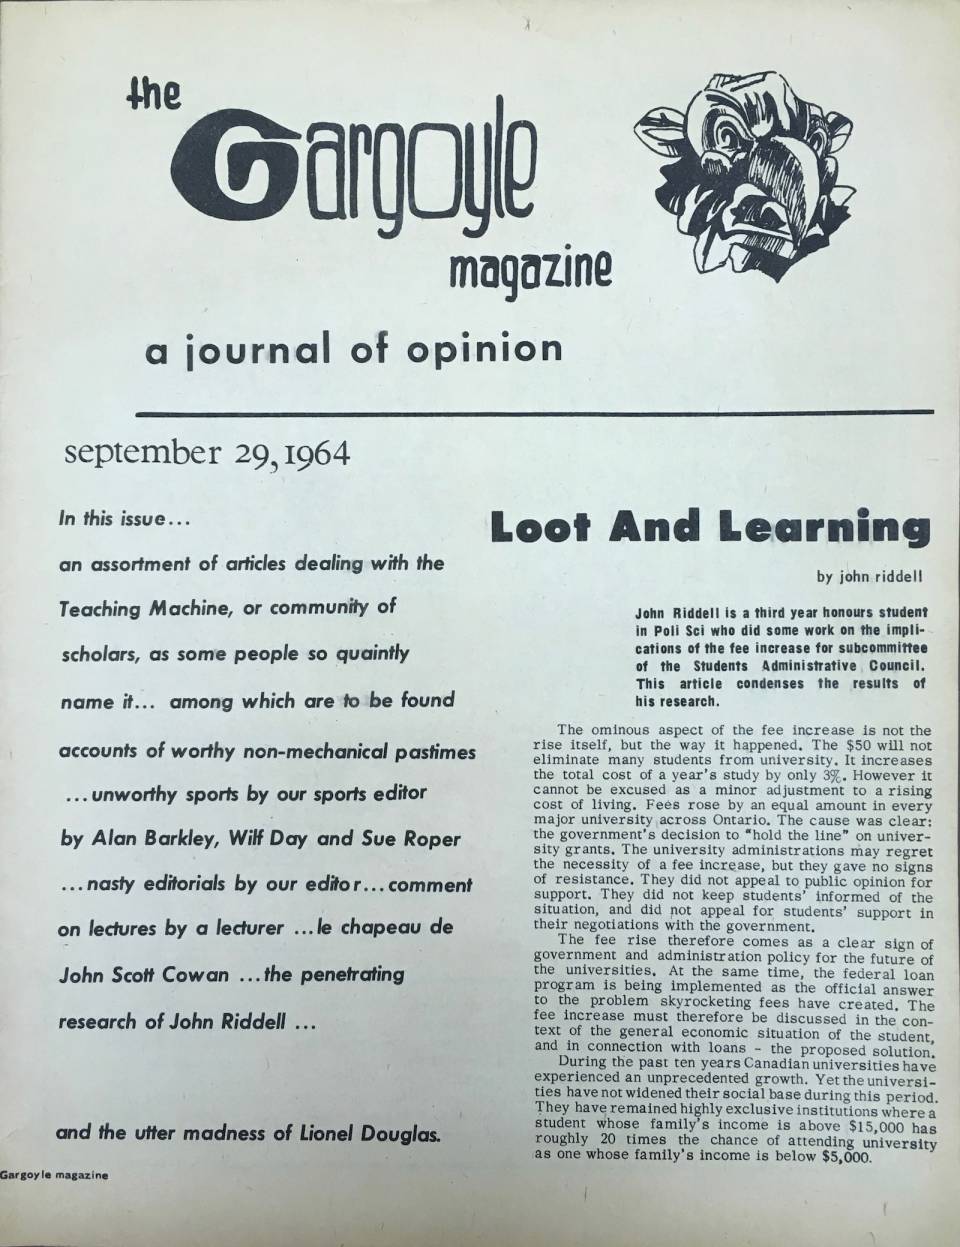 Front page of "The Gargoyle Magazine, a journal of opinion, September 29, 1964"